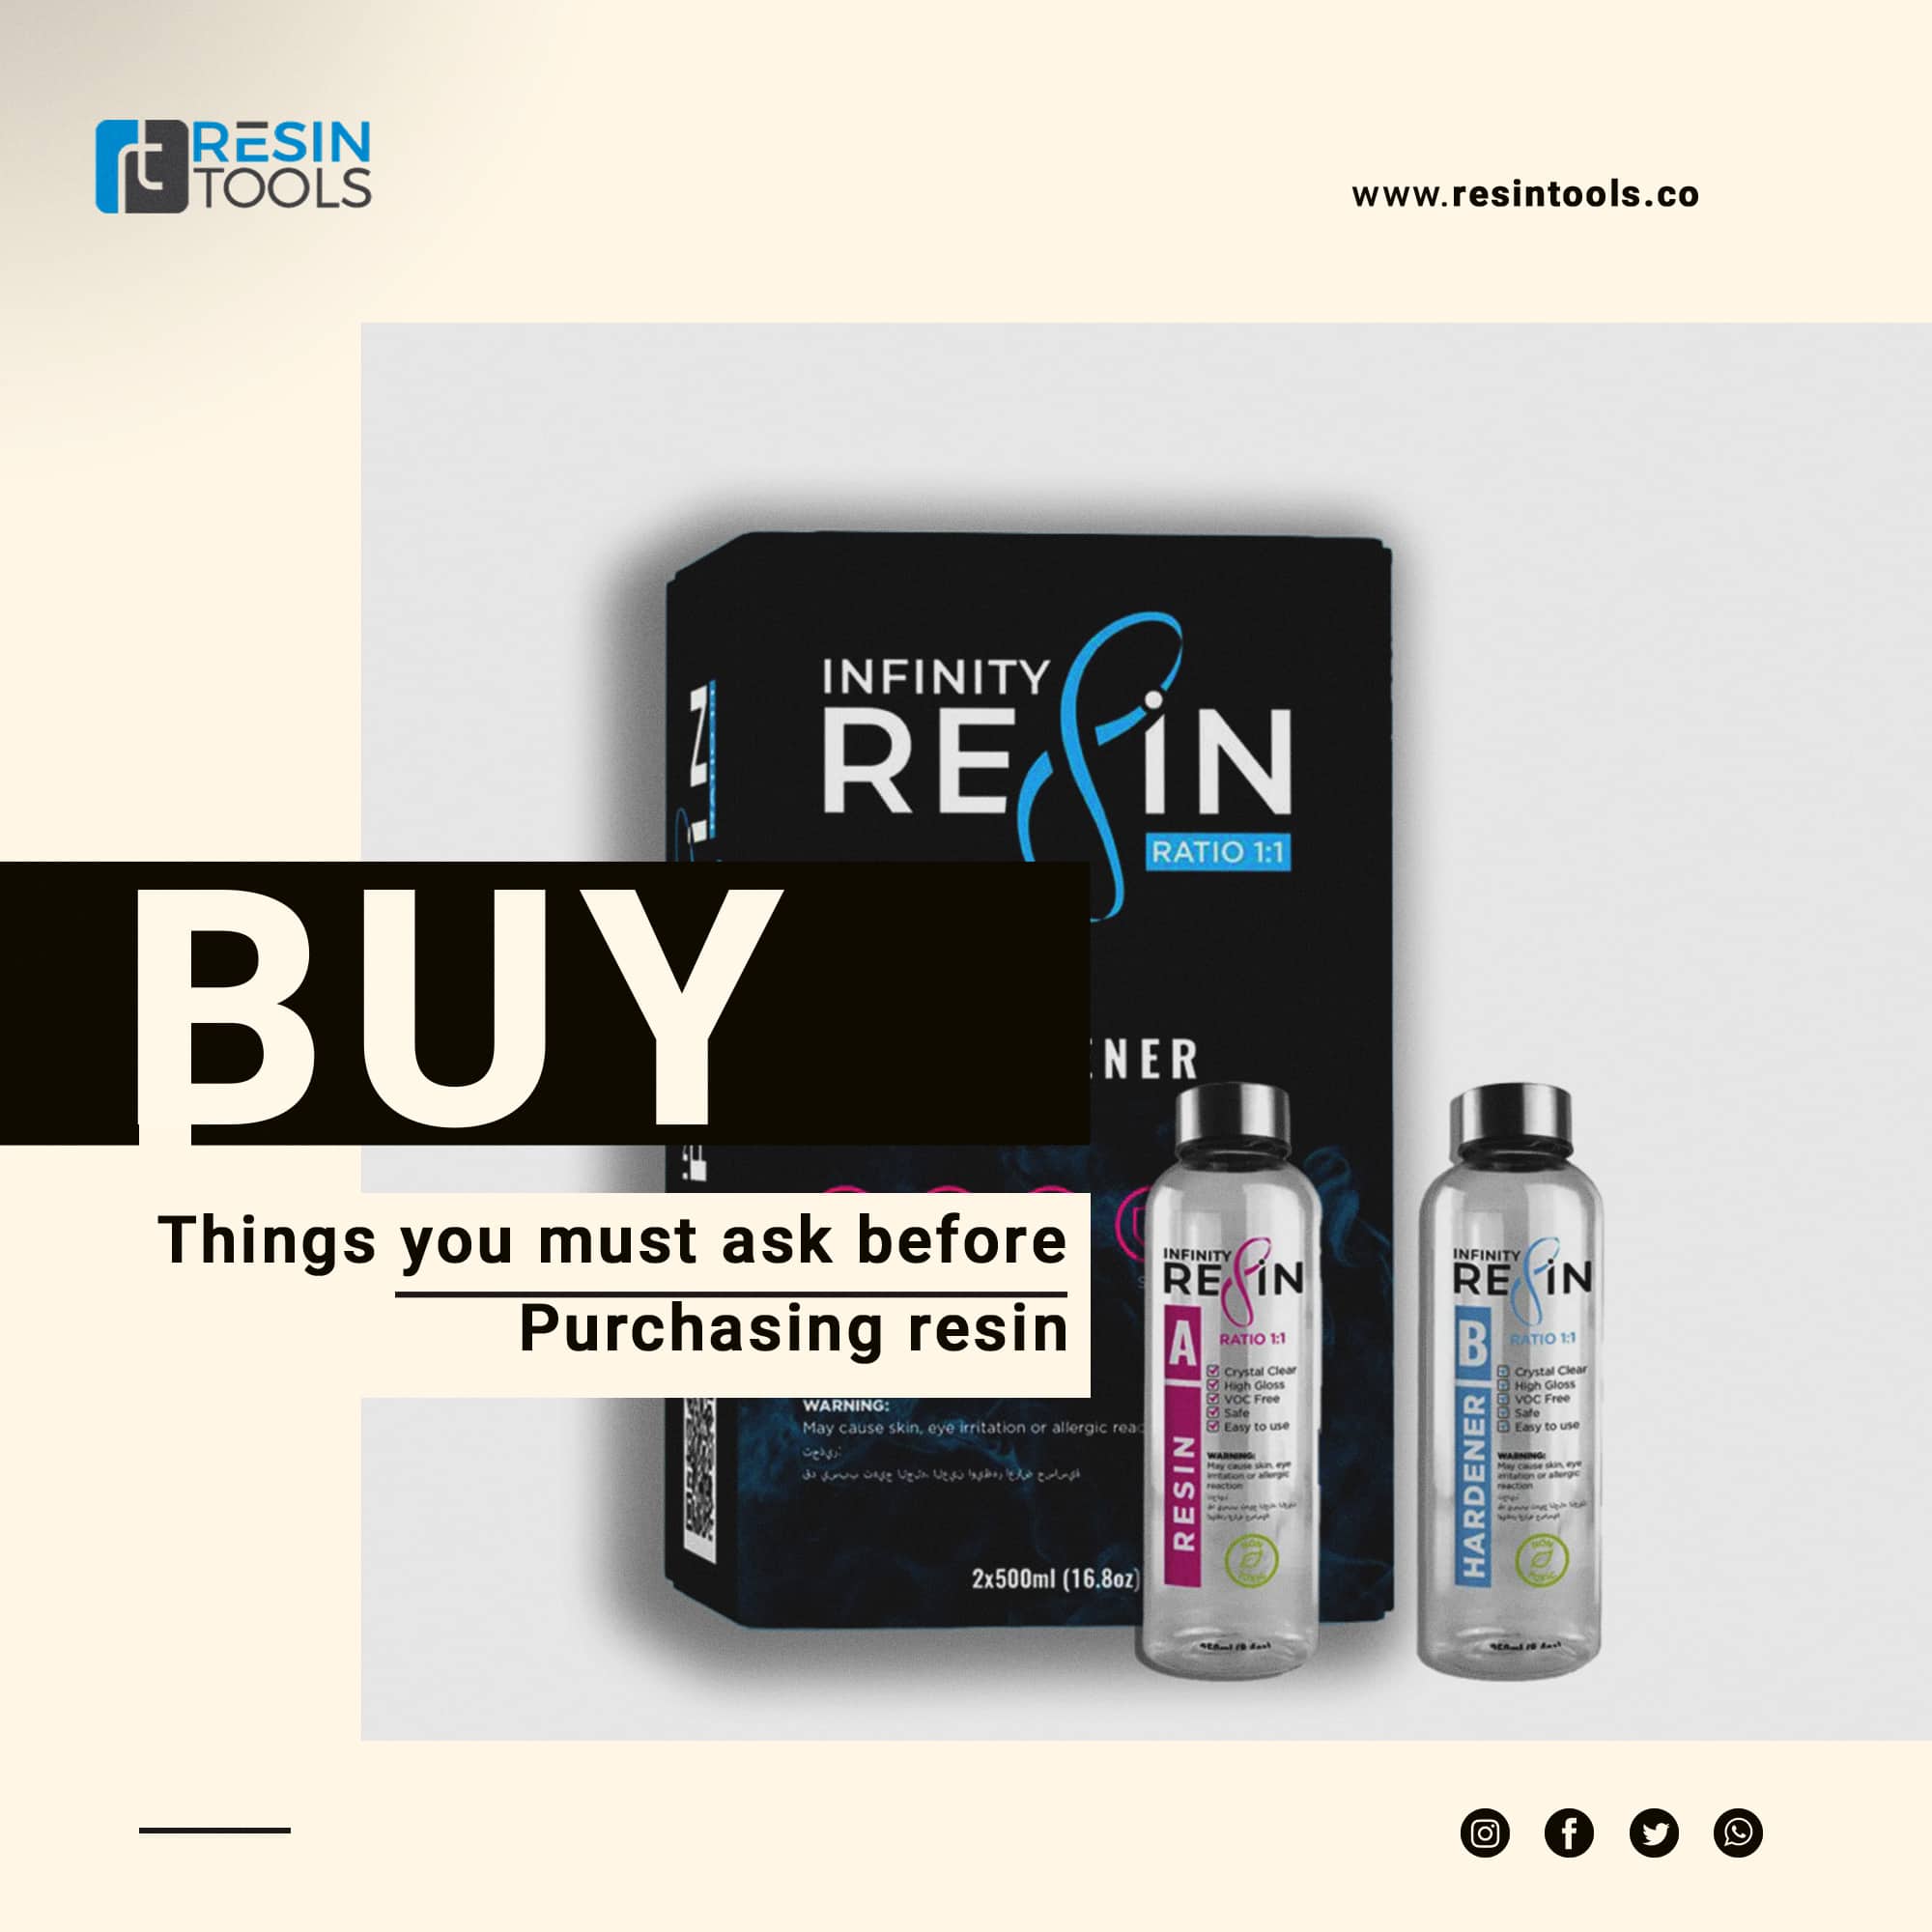 Purchase resin –Things you must ask before purchasing resin - Resintools.co